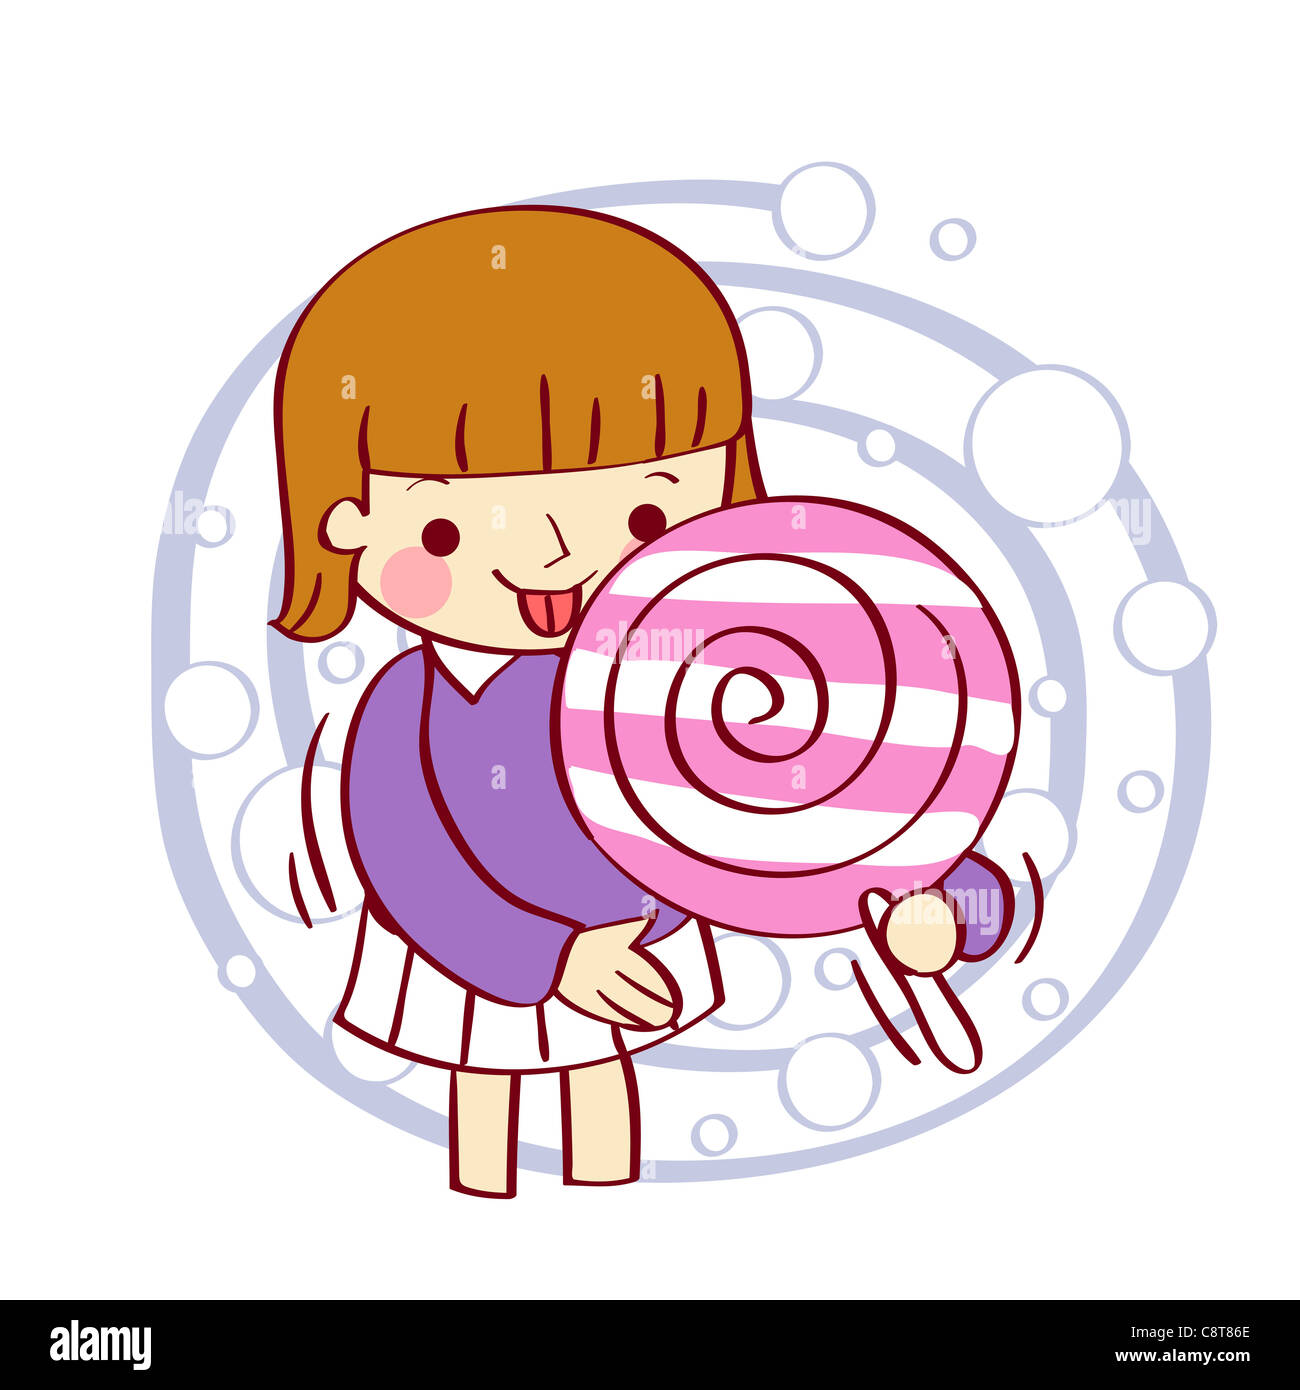 Illustration of a little girl eating lollypop Stock Photo